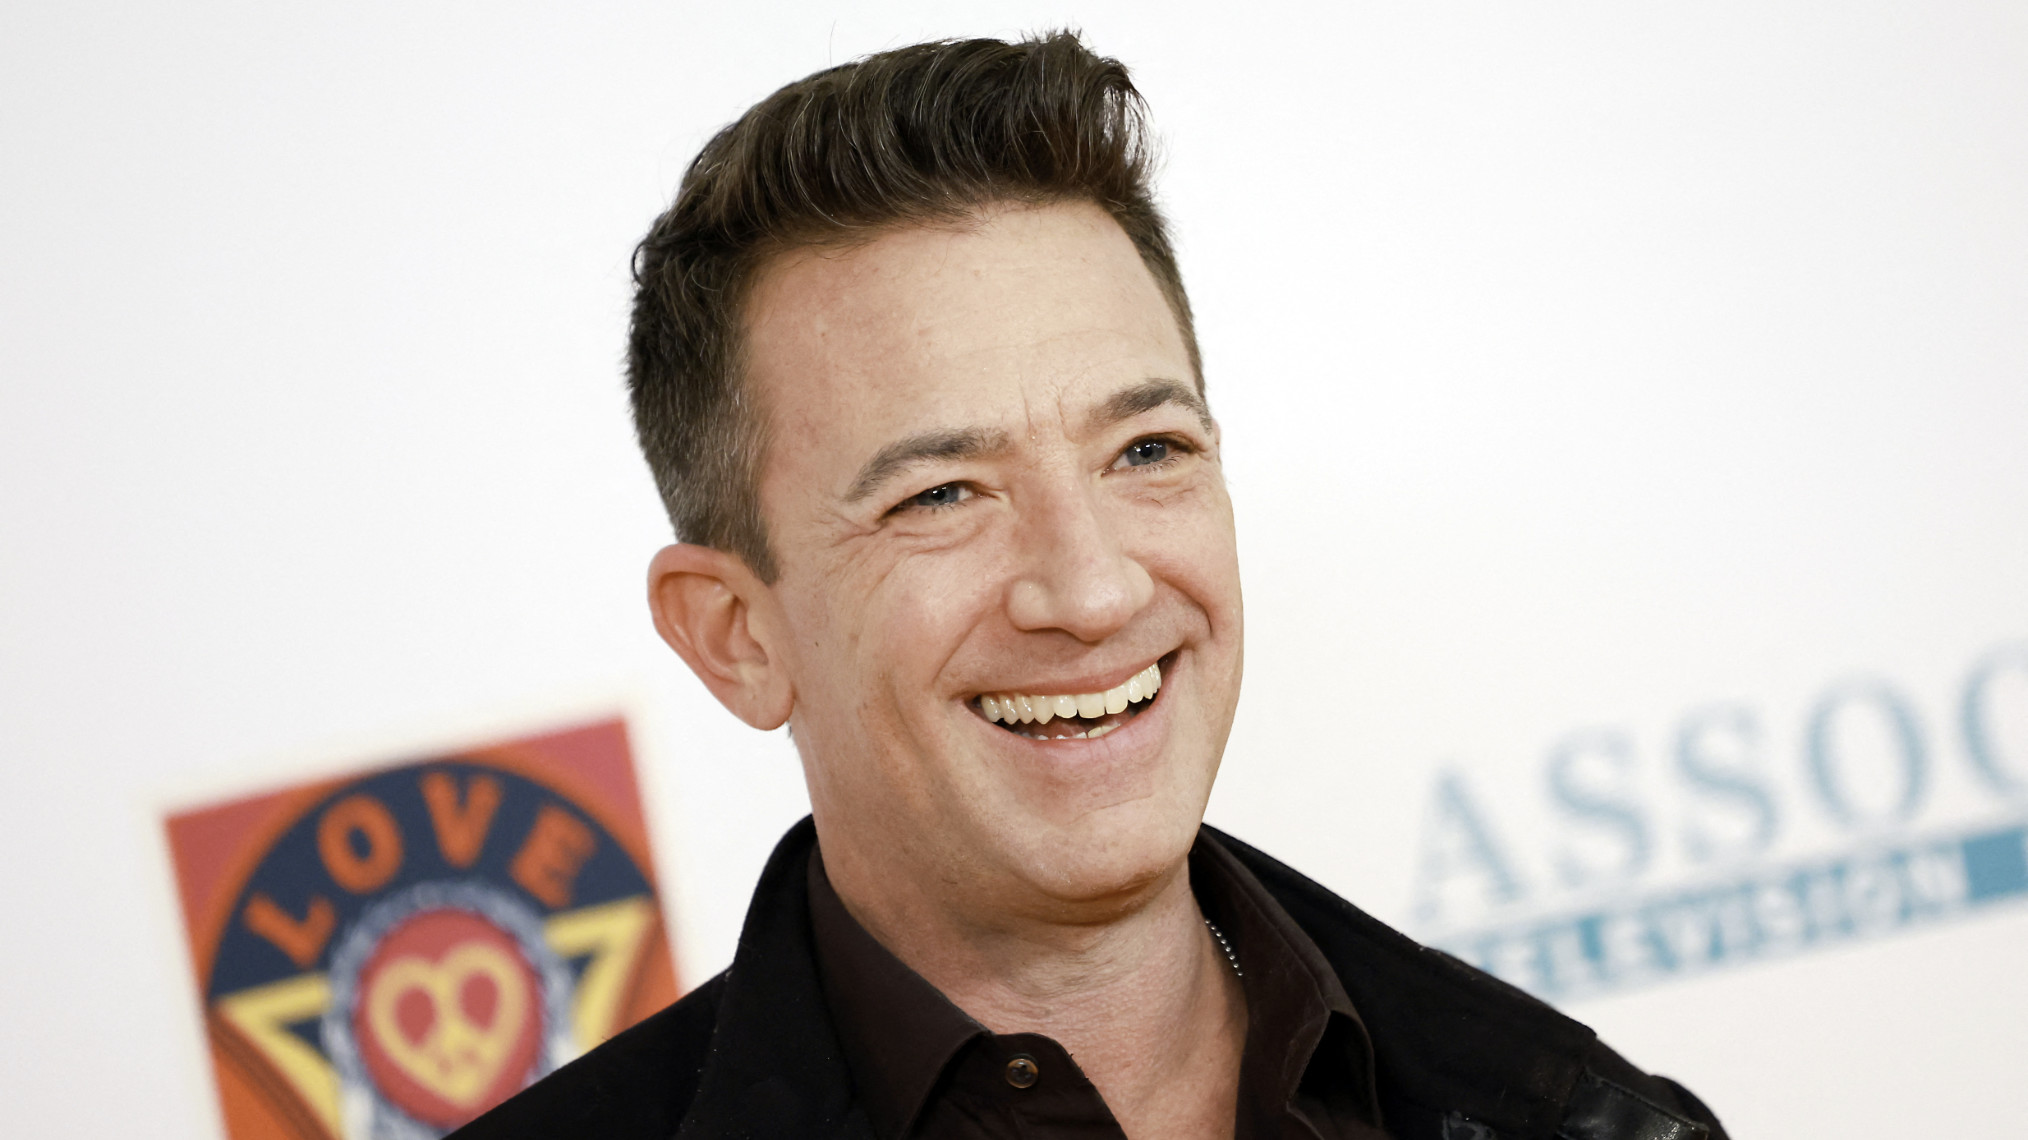 David Faustino Net Worth - The Success Story Behind His $6 Million Wealth